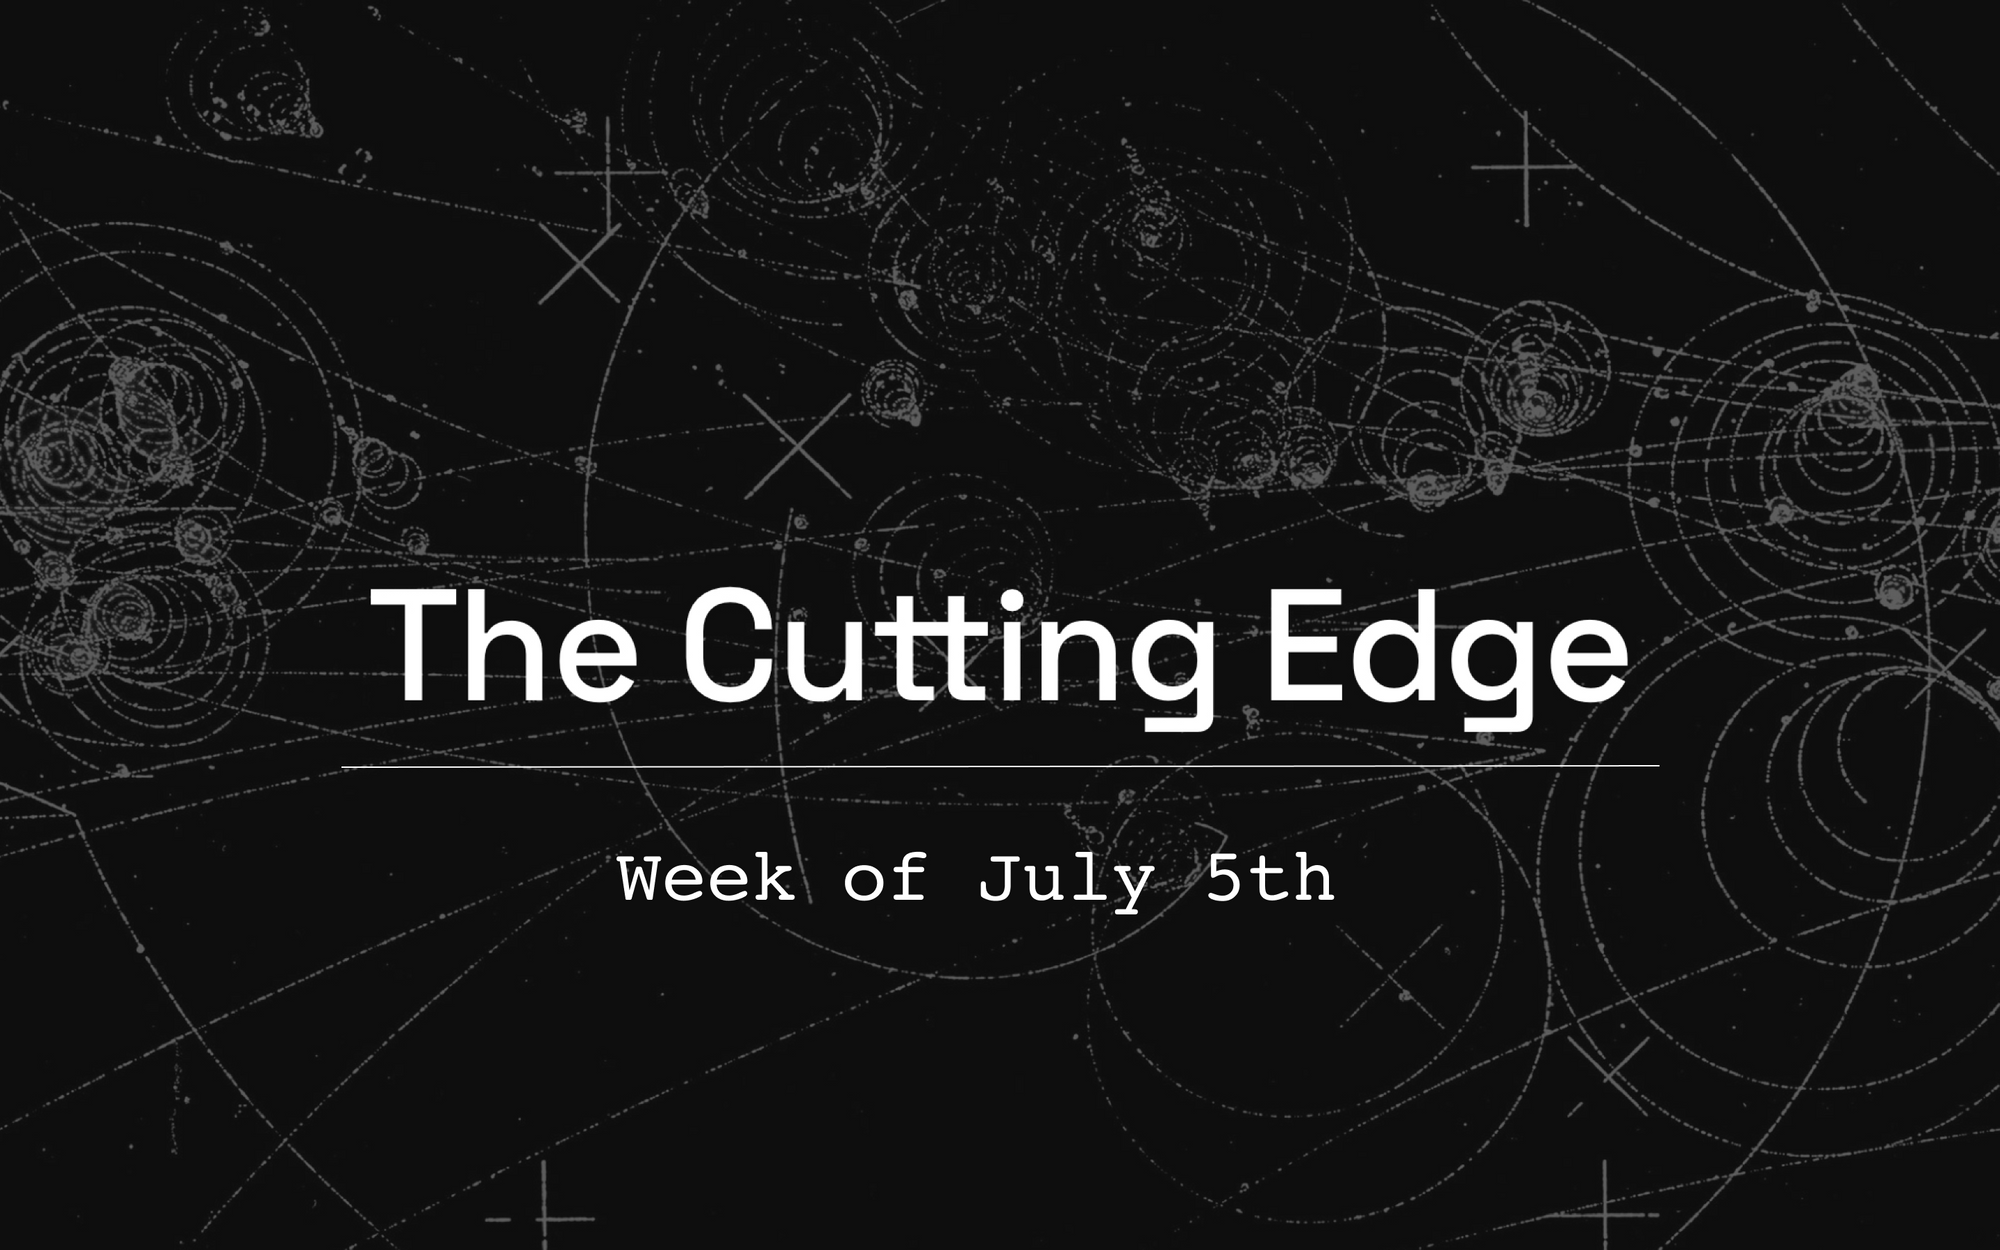 The Cutting Edge: Week of July 5th